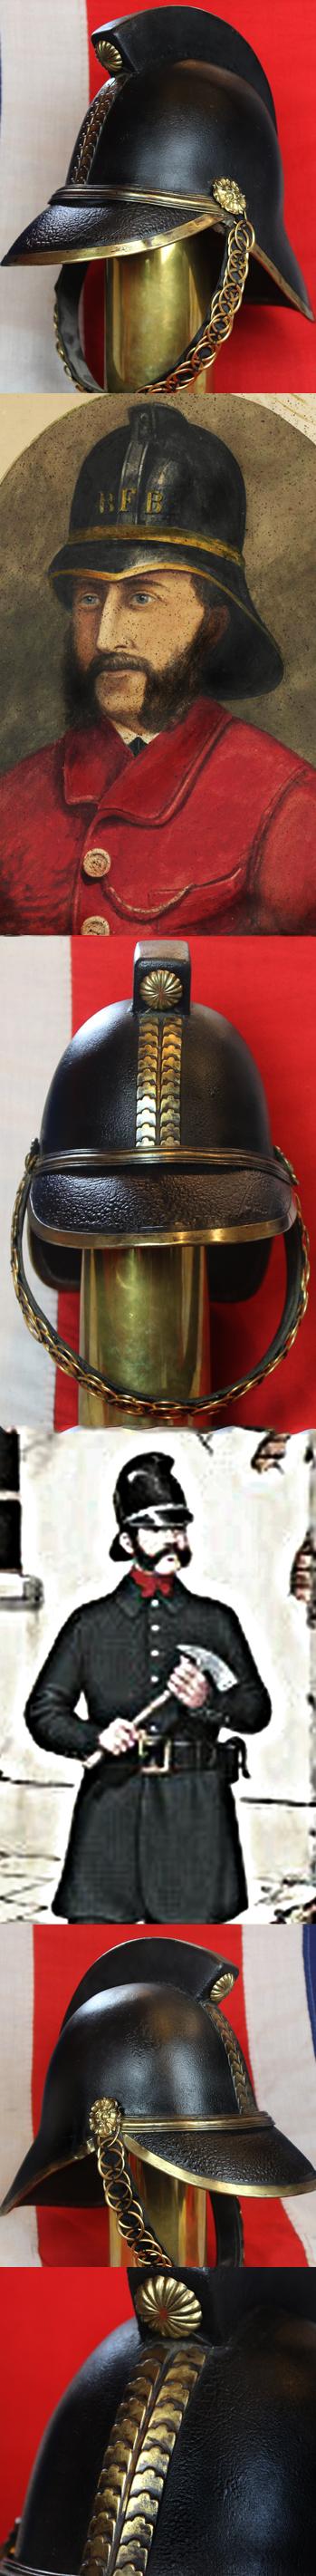 NOW SOLD A Very Good and Scarce Antique Victorian to Edwardian Leather and Brass Fire Helmet probably by the Merryweather Helmet Co.